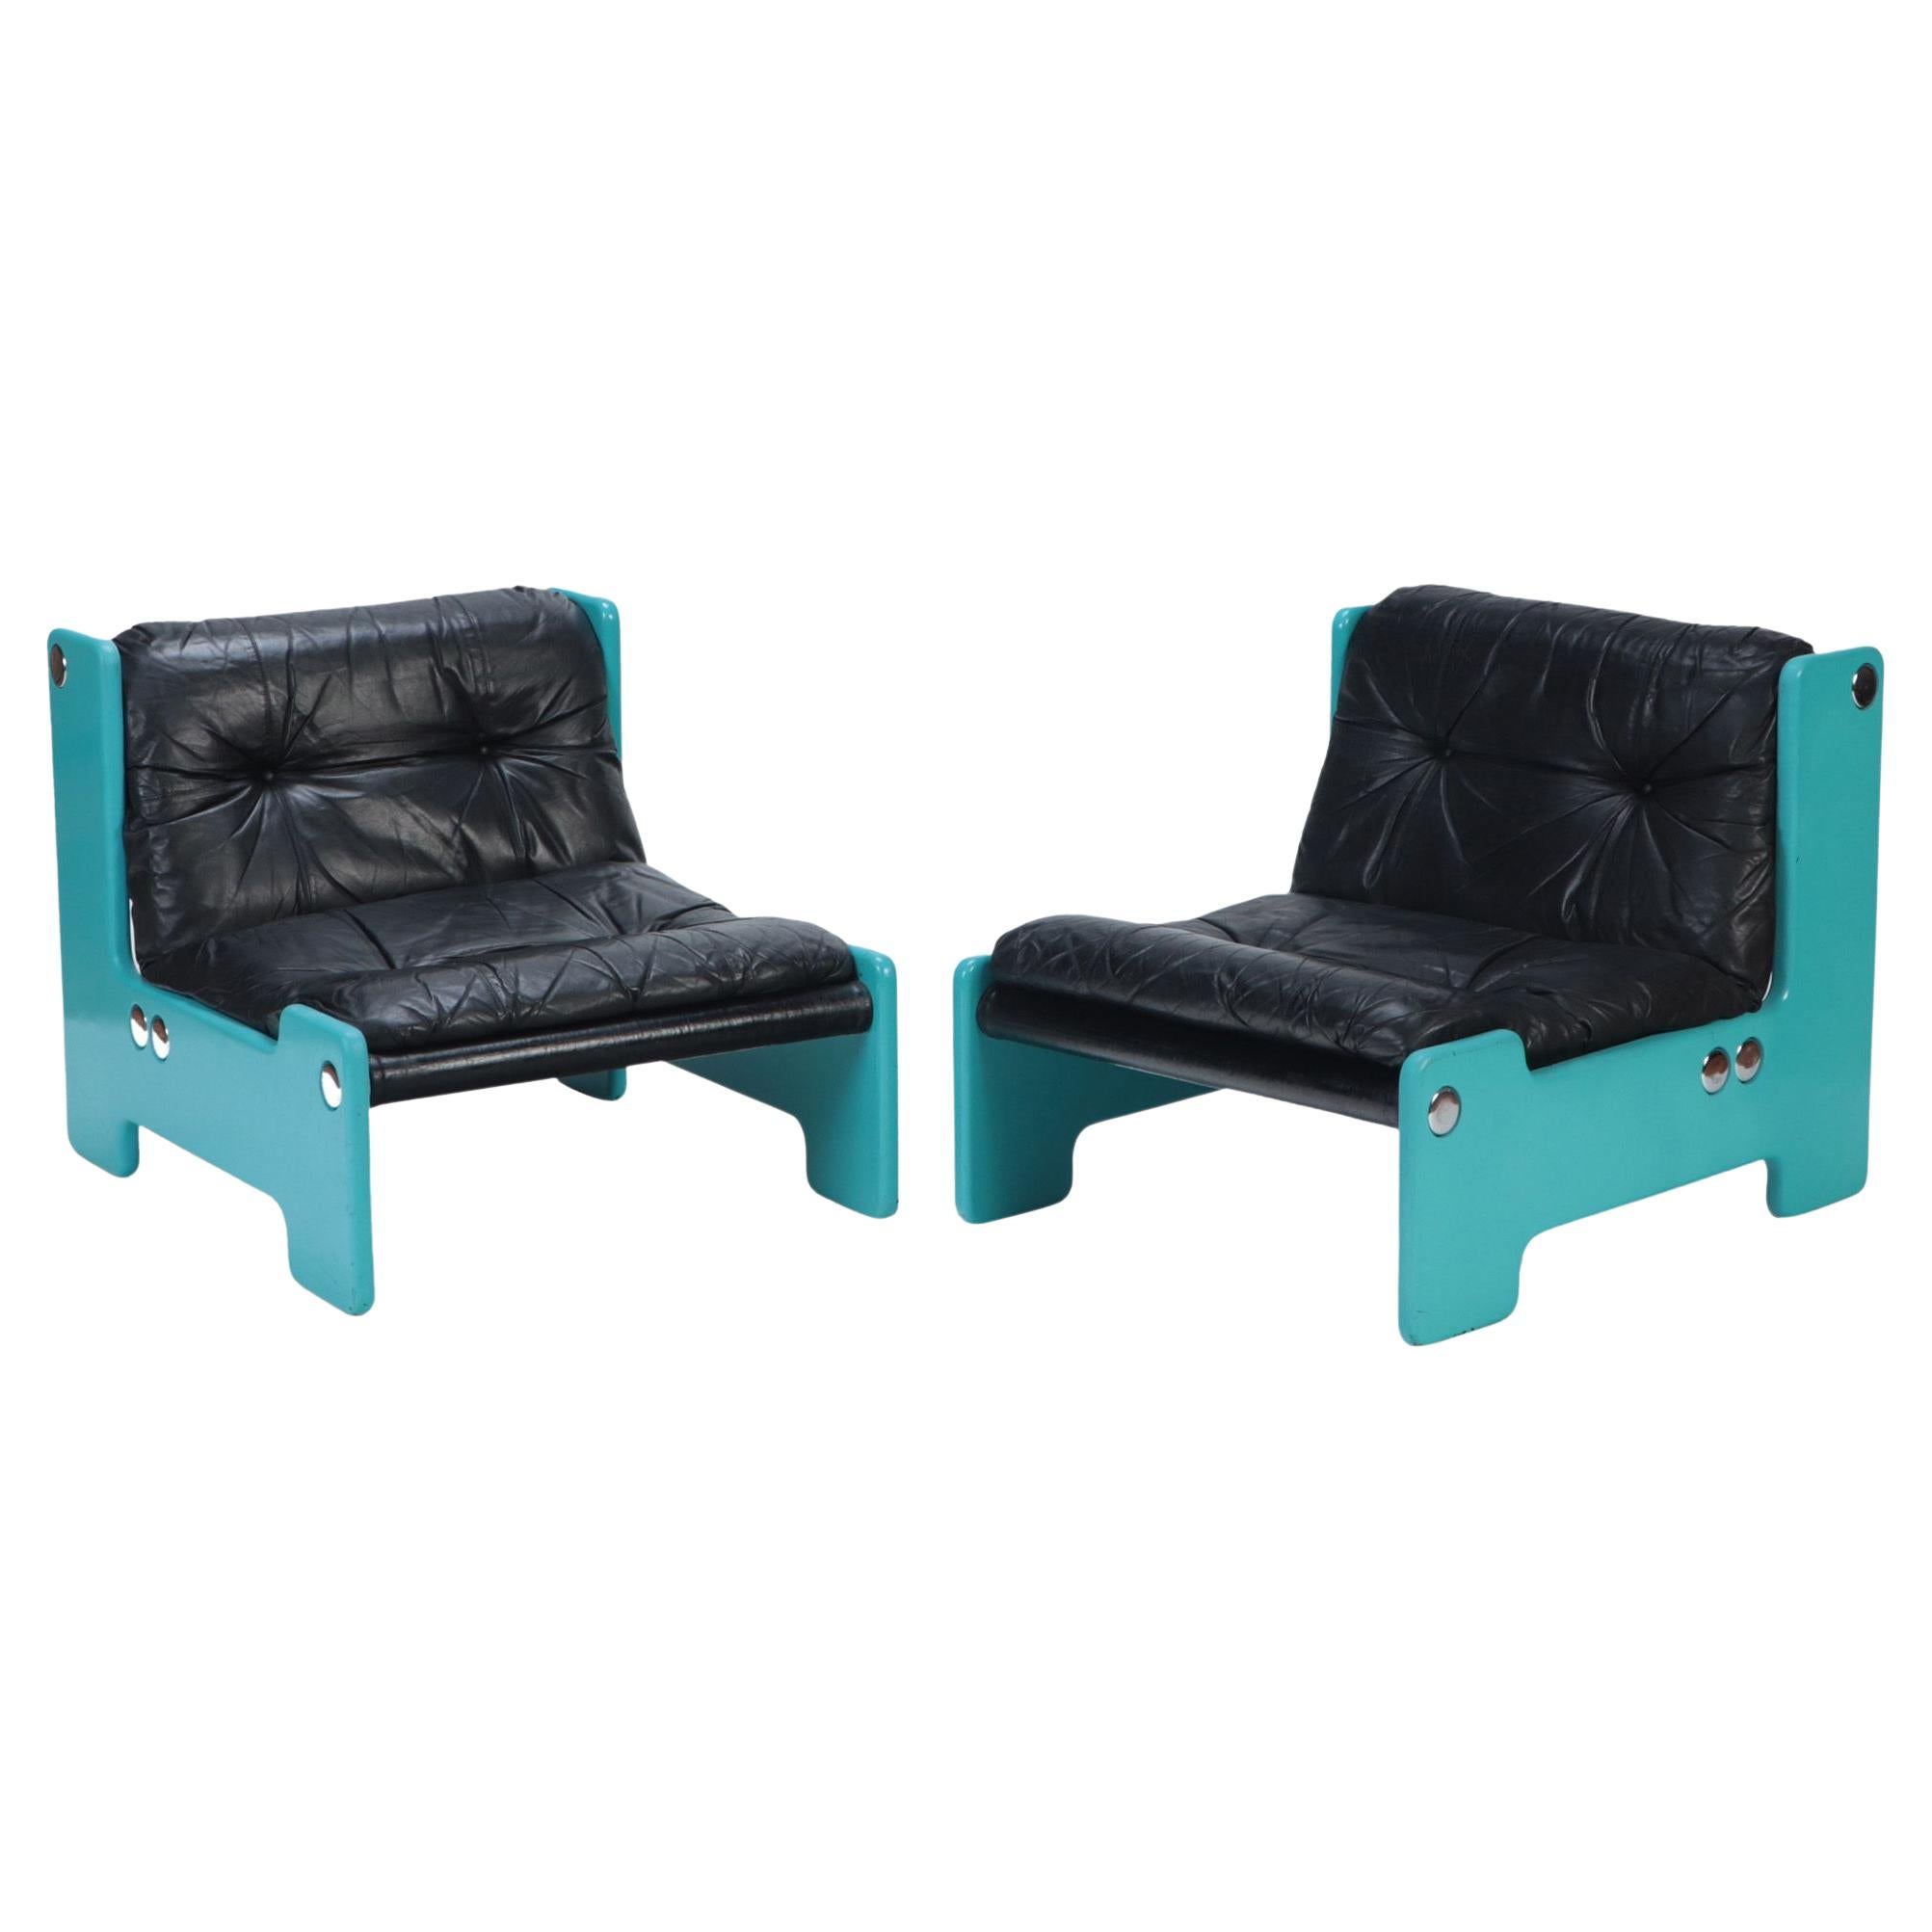 Pair of Blue Framed Lounge Chairs with Black Leather Seats, C 1970